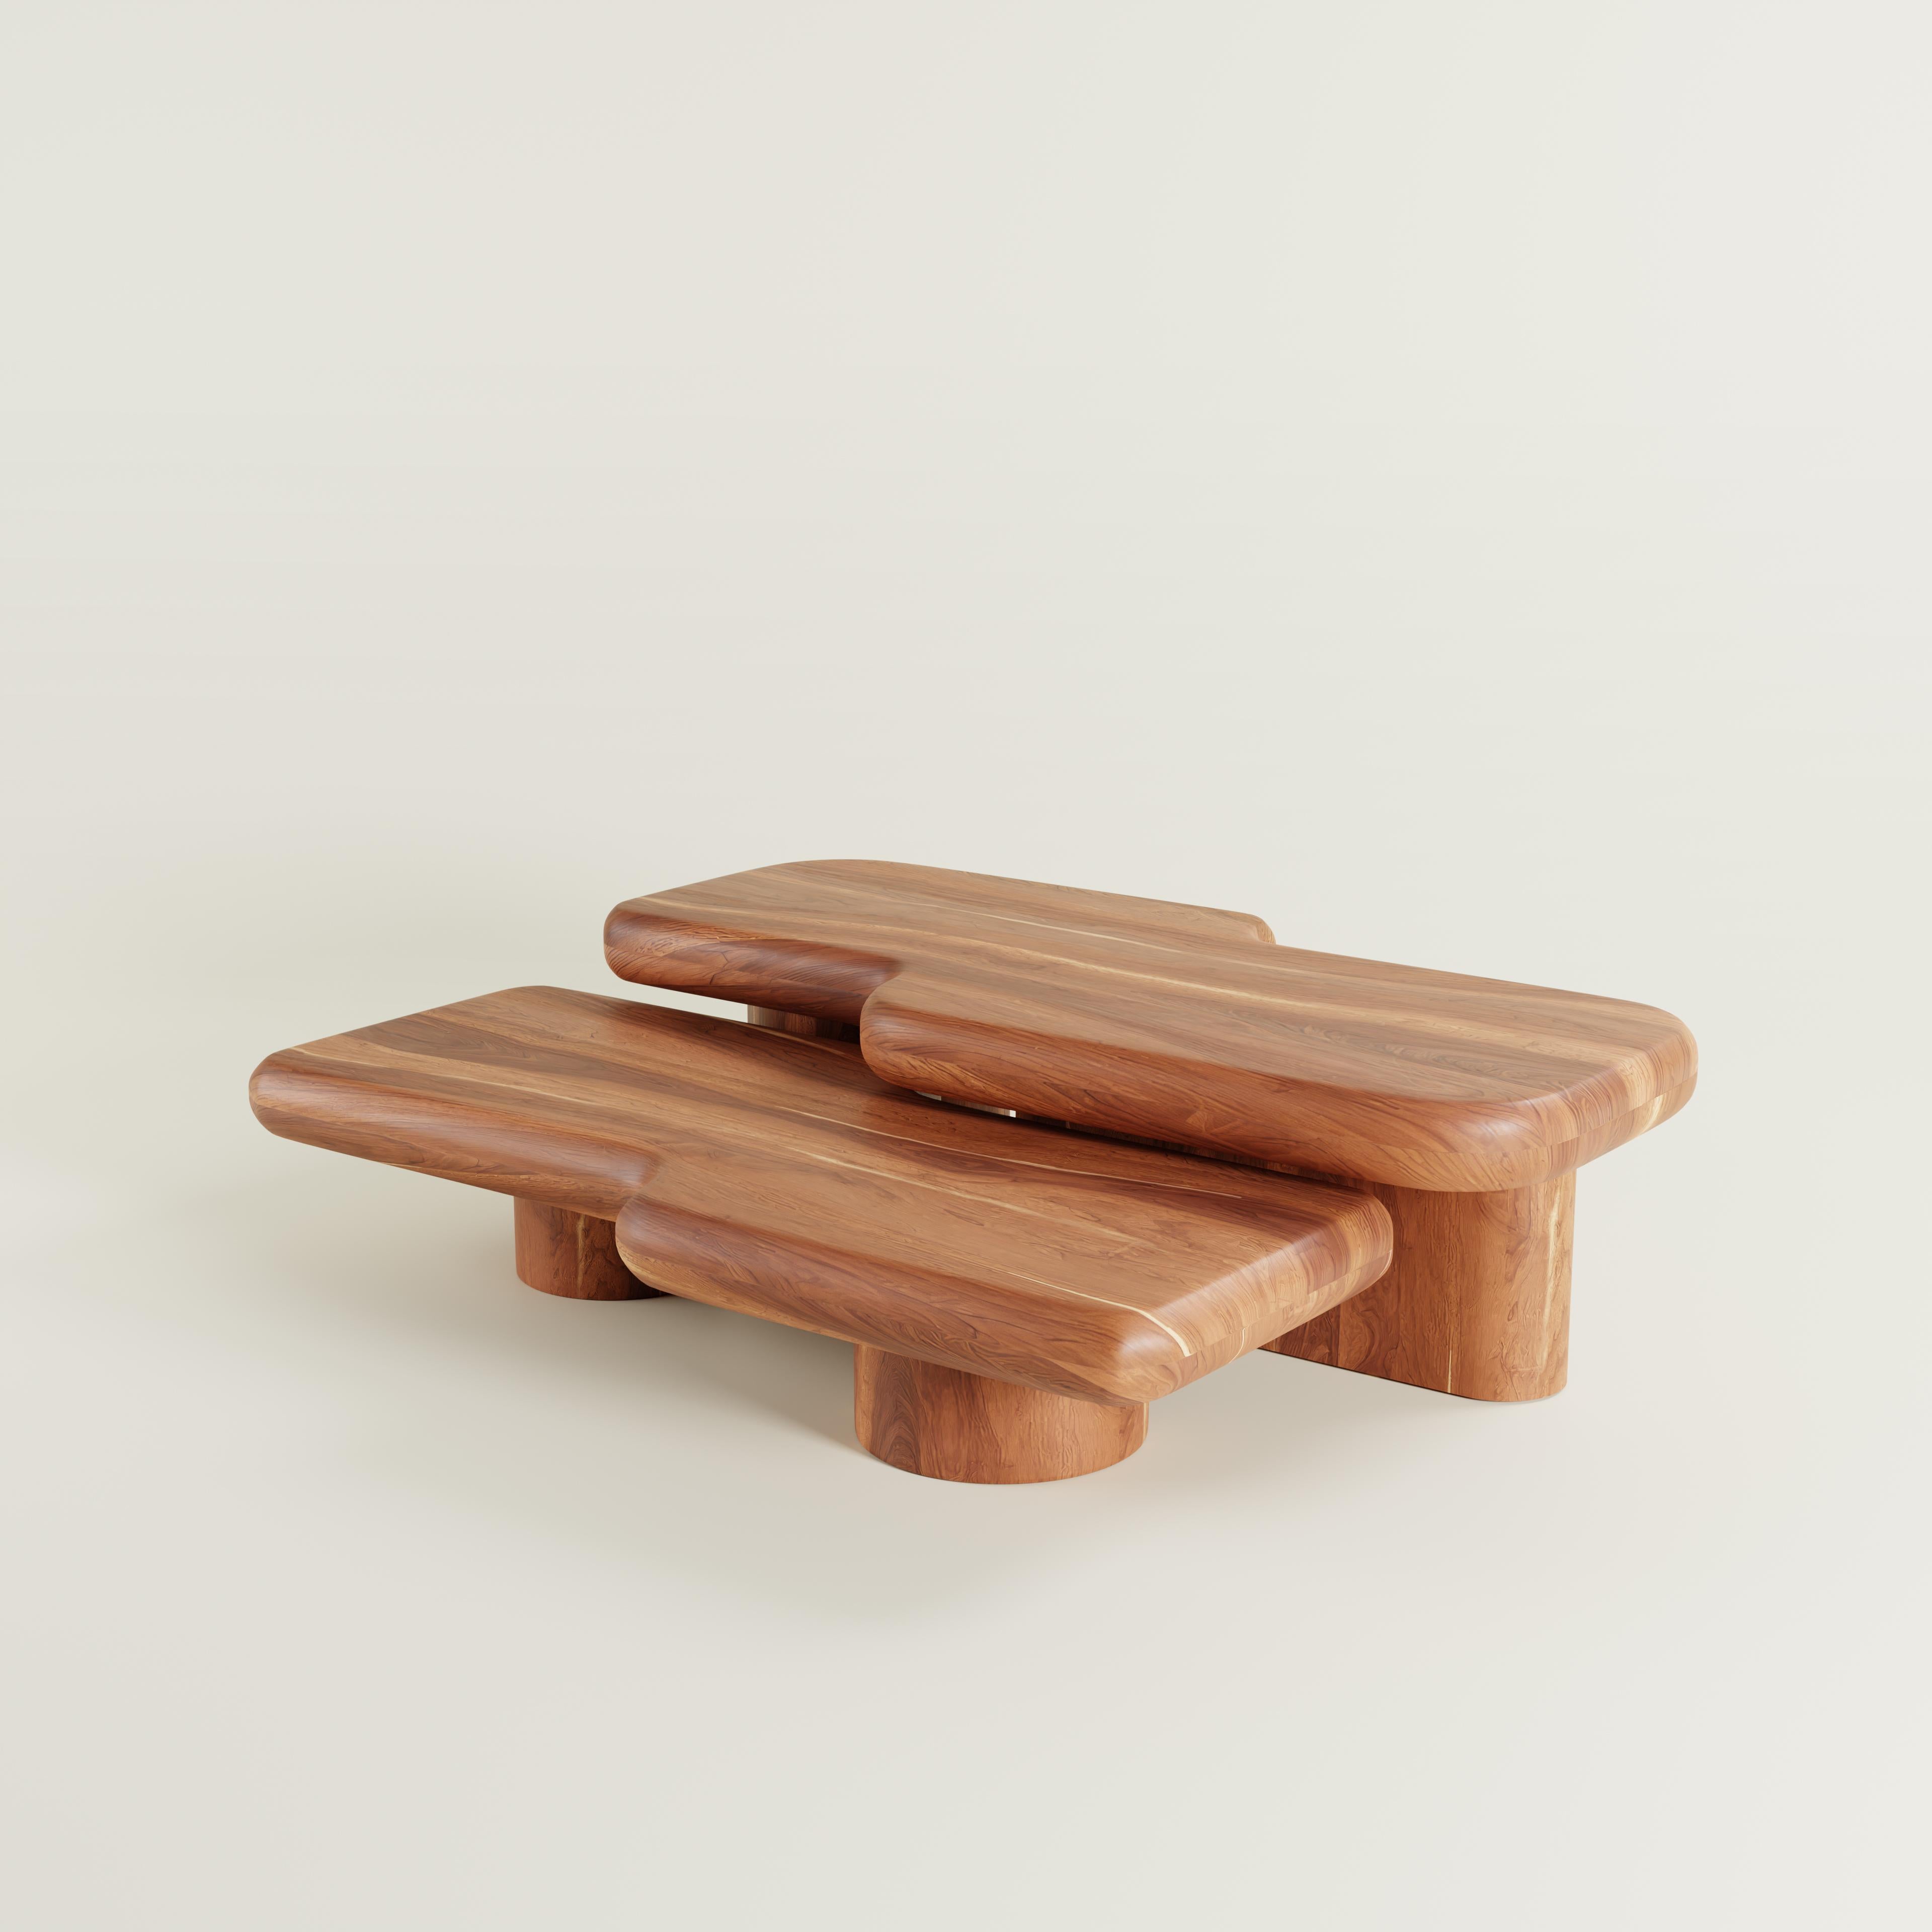 For this collection in collaboration with Rio Estudio, inspiration is drawn from hydraulic circuits; systems that transport some liquid component, comprised of long and linear elements, articulated by bends. 

The Circuit Tzalam Wood Coffee Table